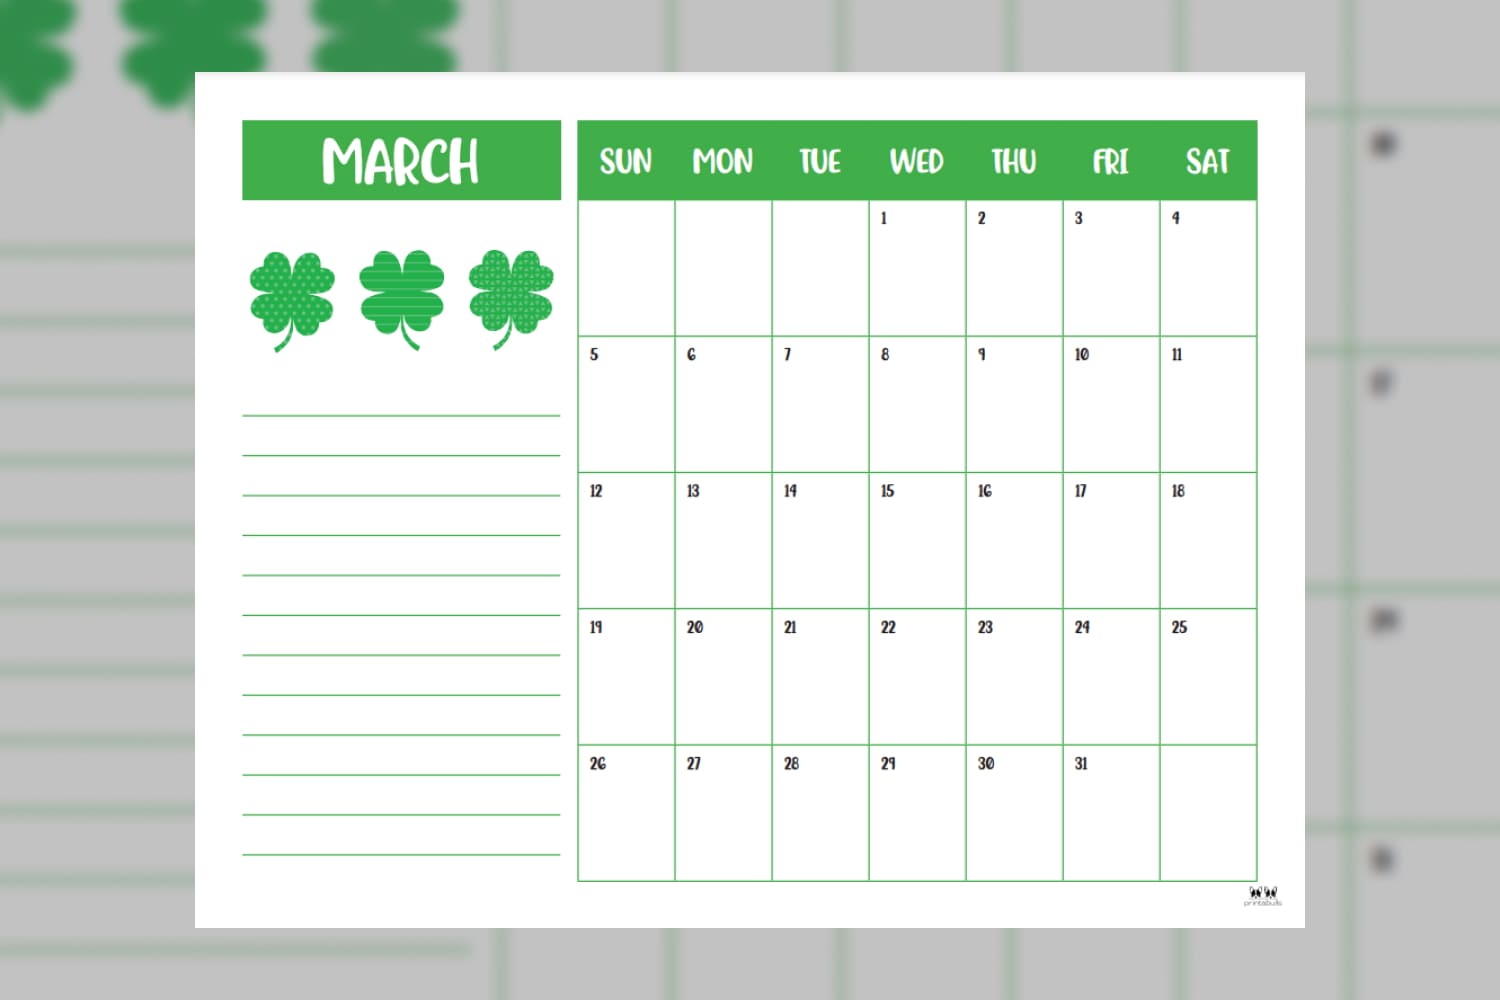 March calendar with green leaves and spaces to take notes.